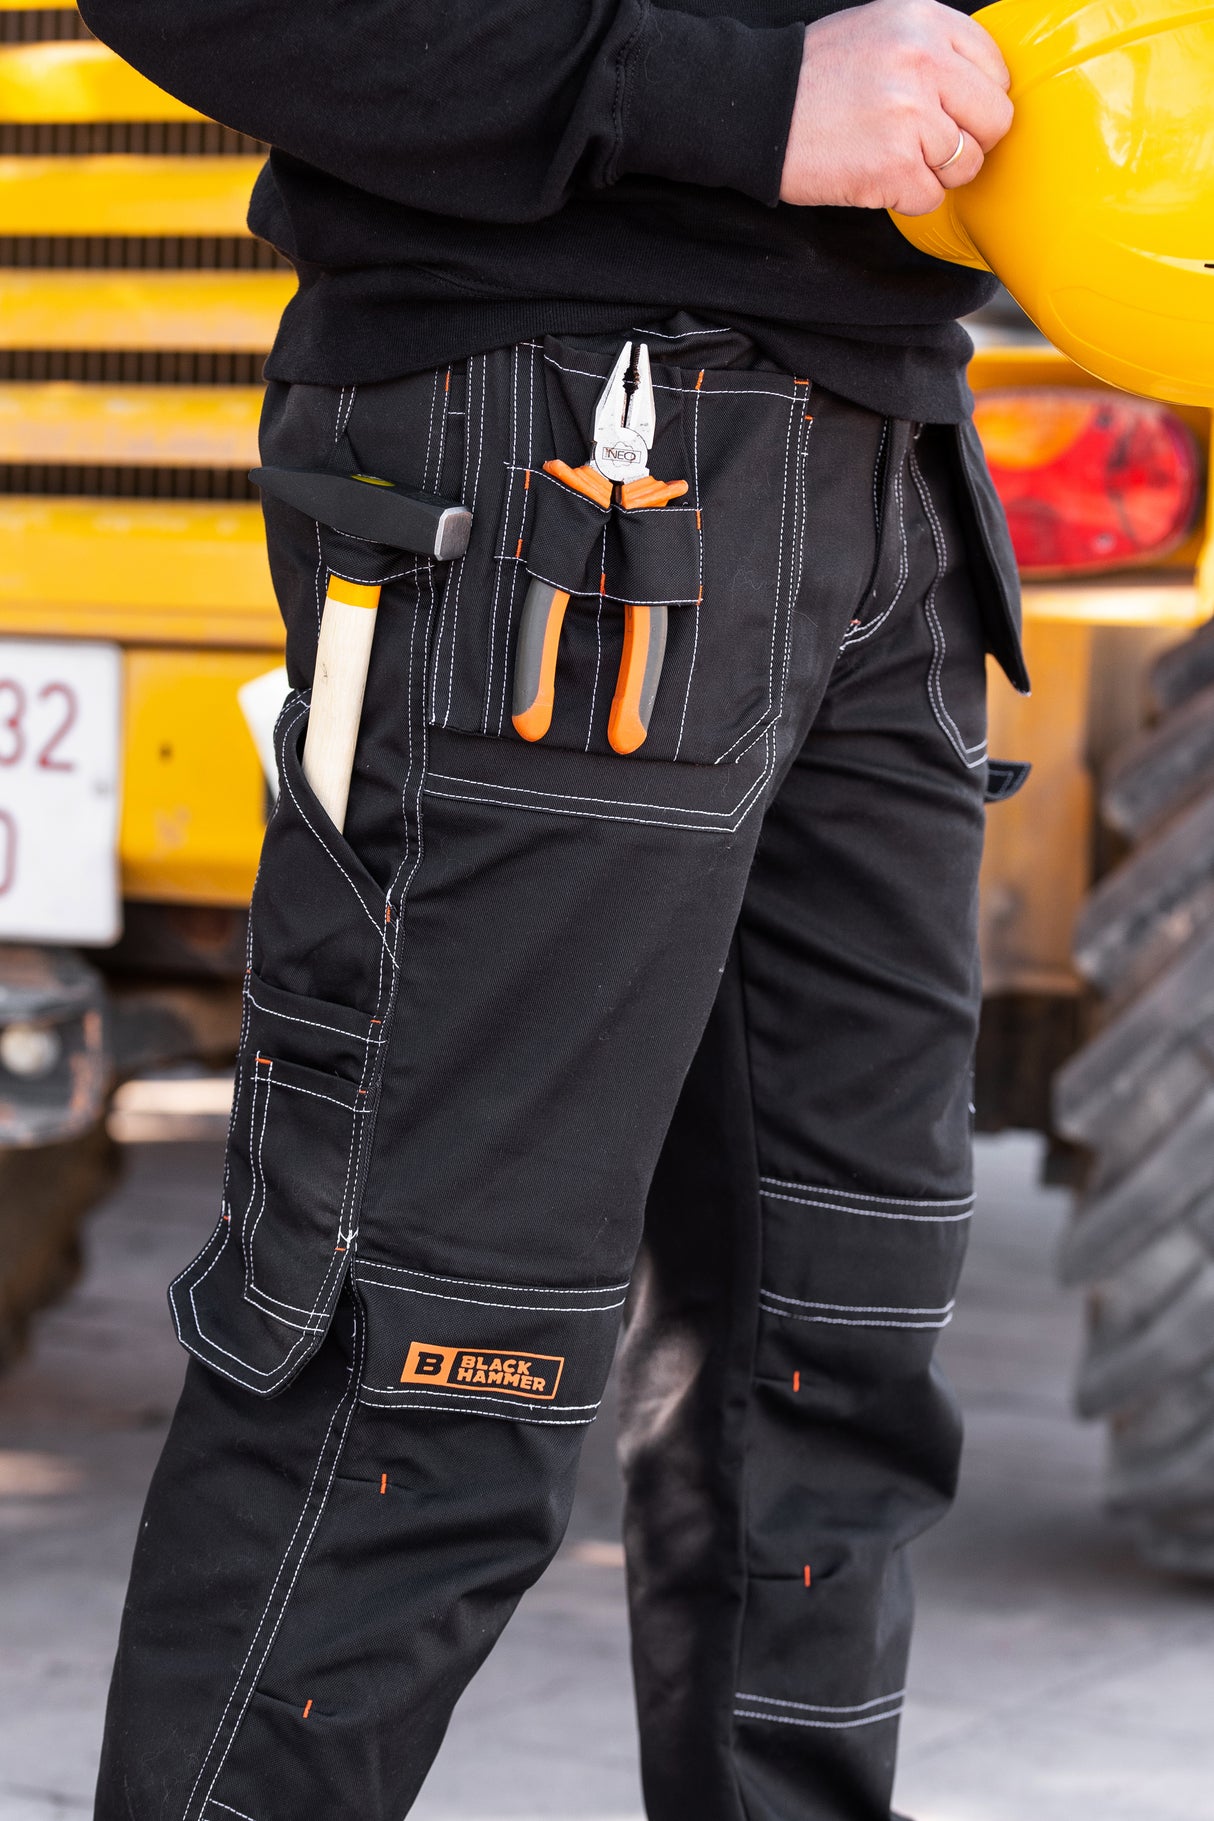 works trousers with multiple pockets for handy tools black